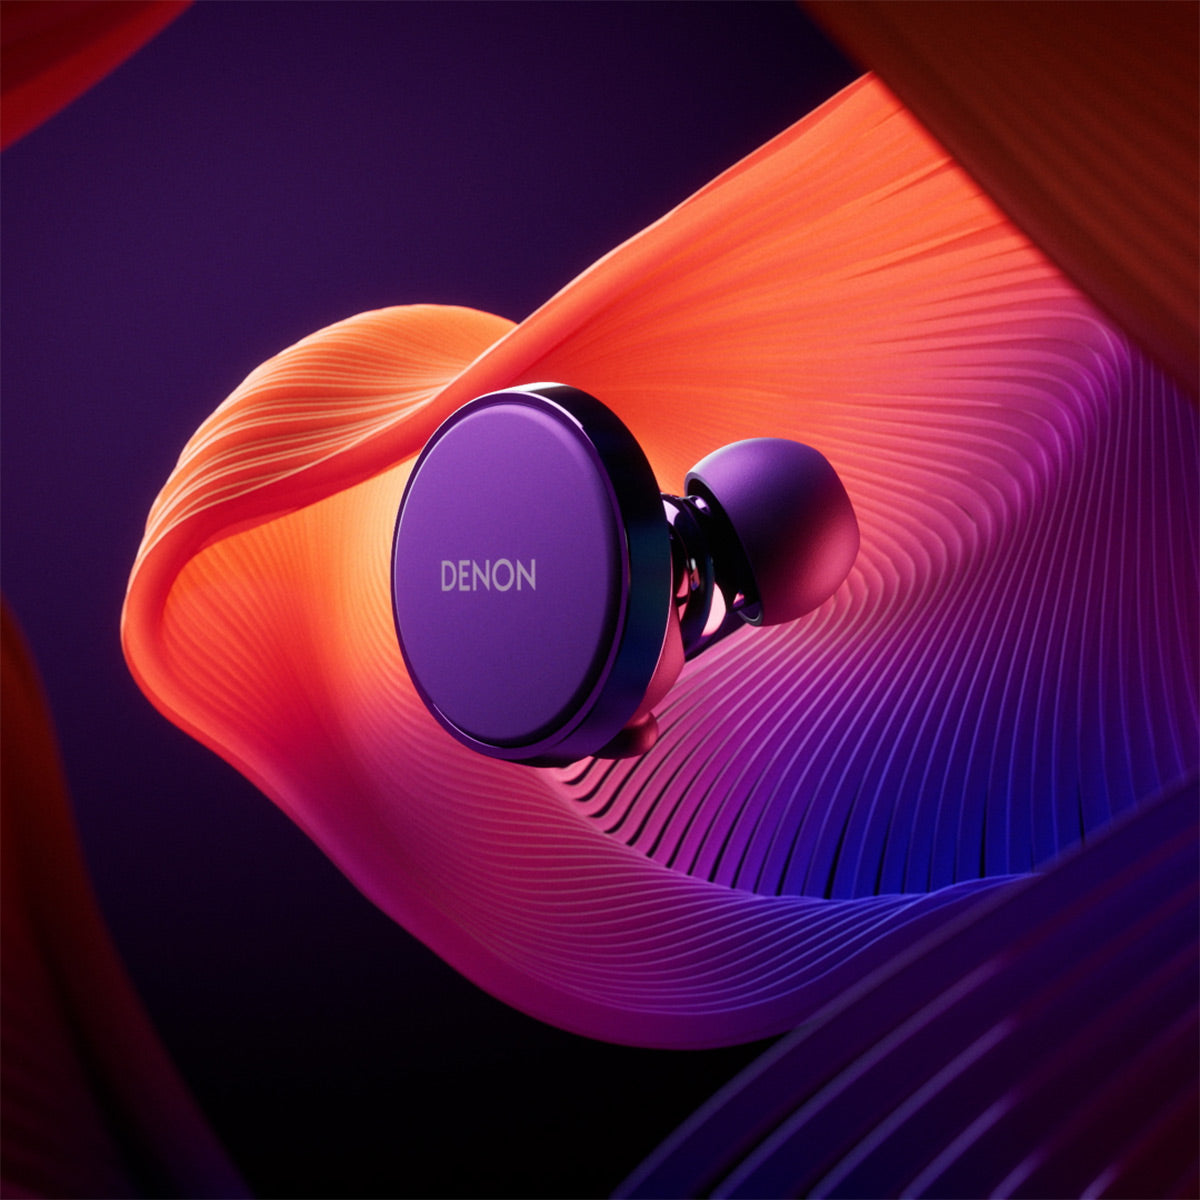 Denon PerL Pro True Wireless Earbuds with Active Noise Cancellation,  Spatial Audio, and Adaptive Acoustic Technology | World Wide Stereo | In-Ear-Kopfhörer